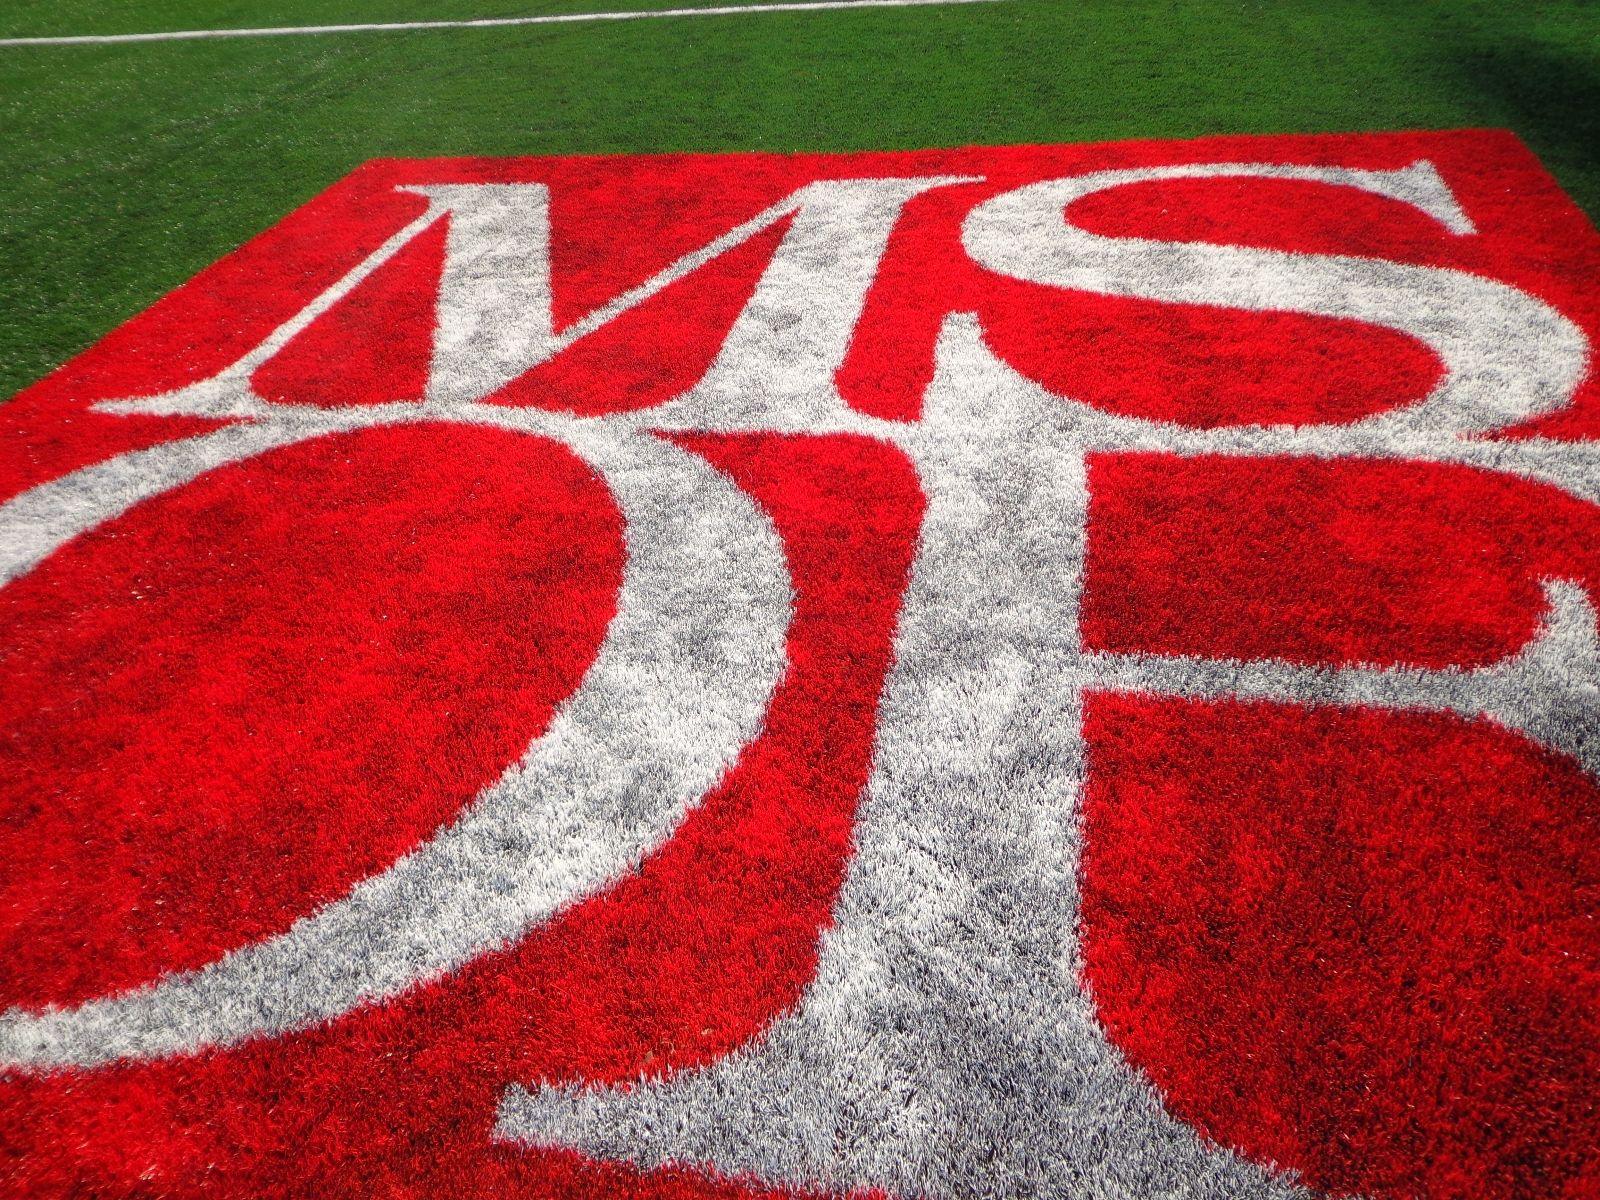 MSOE Logo - MSOE Athletic Field and Parking Complex Urban Milwaukee